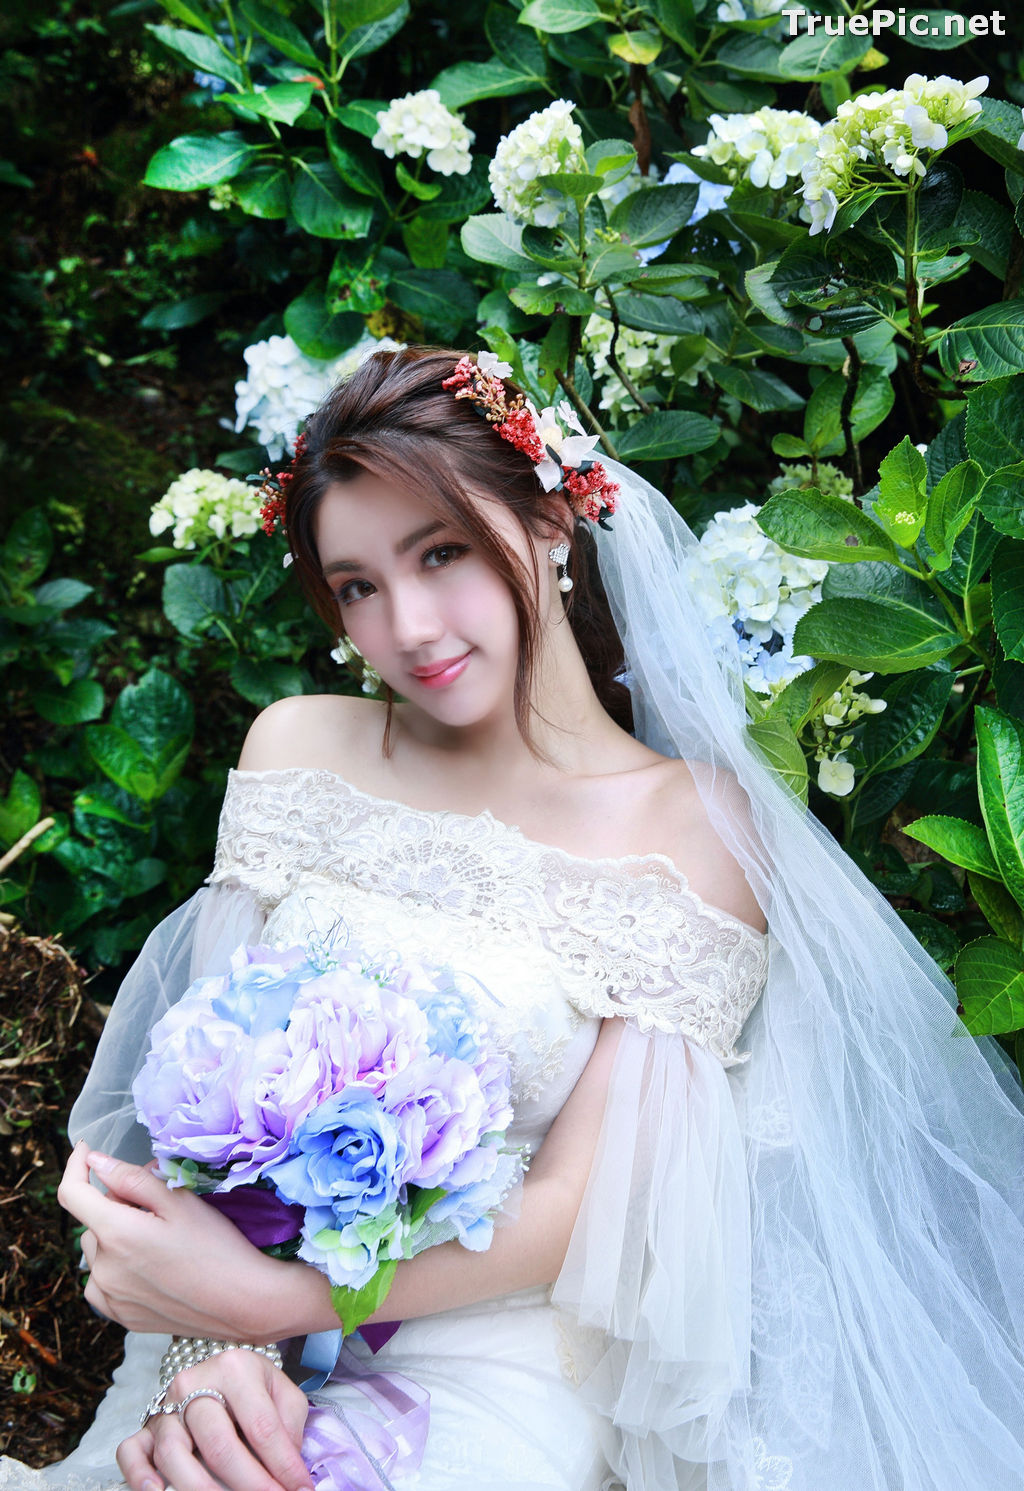 Image Taiwanese Model - 張倫甄 - Beautiful Bride and Hydrangea Flowers - TruePic.net - Picture-44